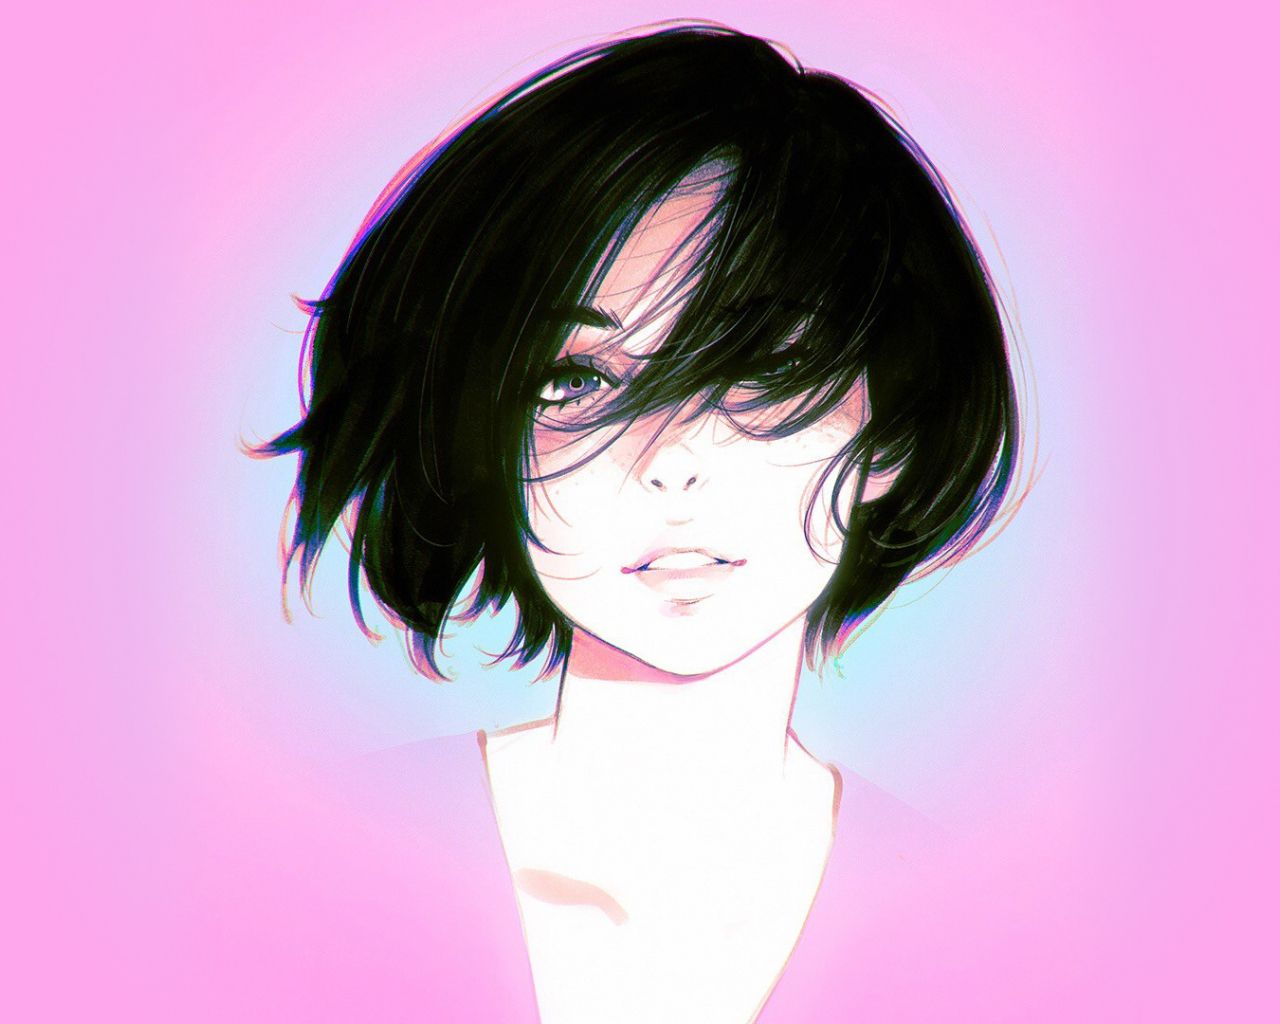 Digital illustration of a woman with short black hair and a pink background - 1280x1024